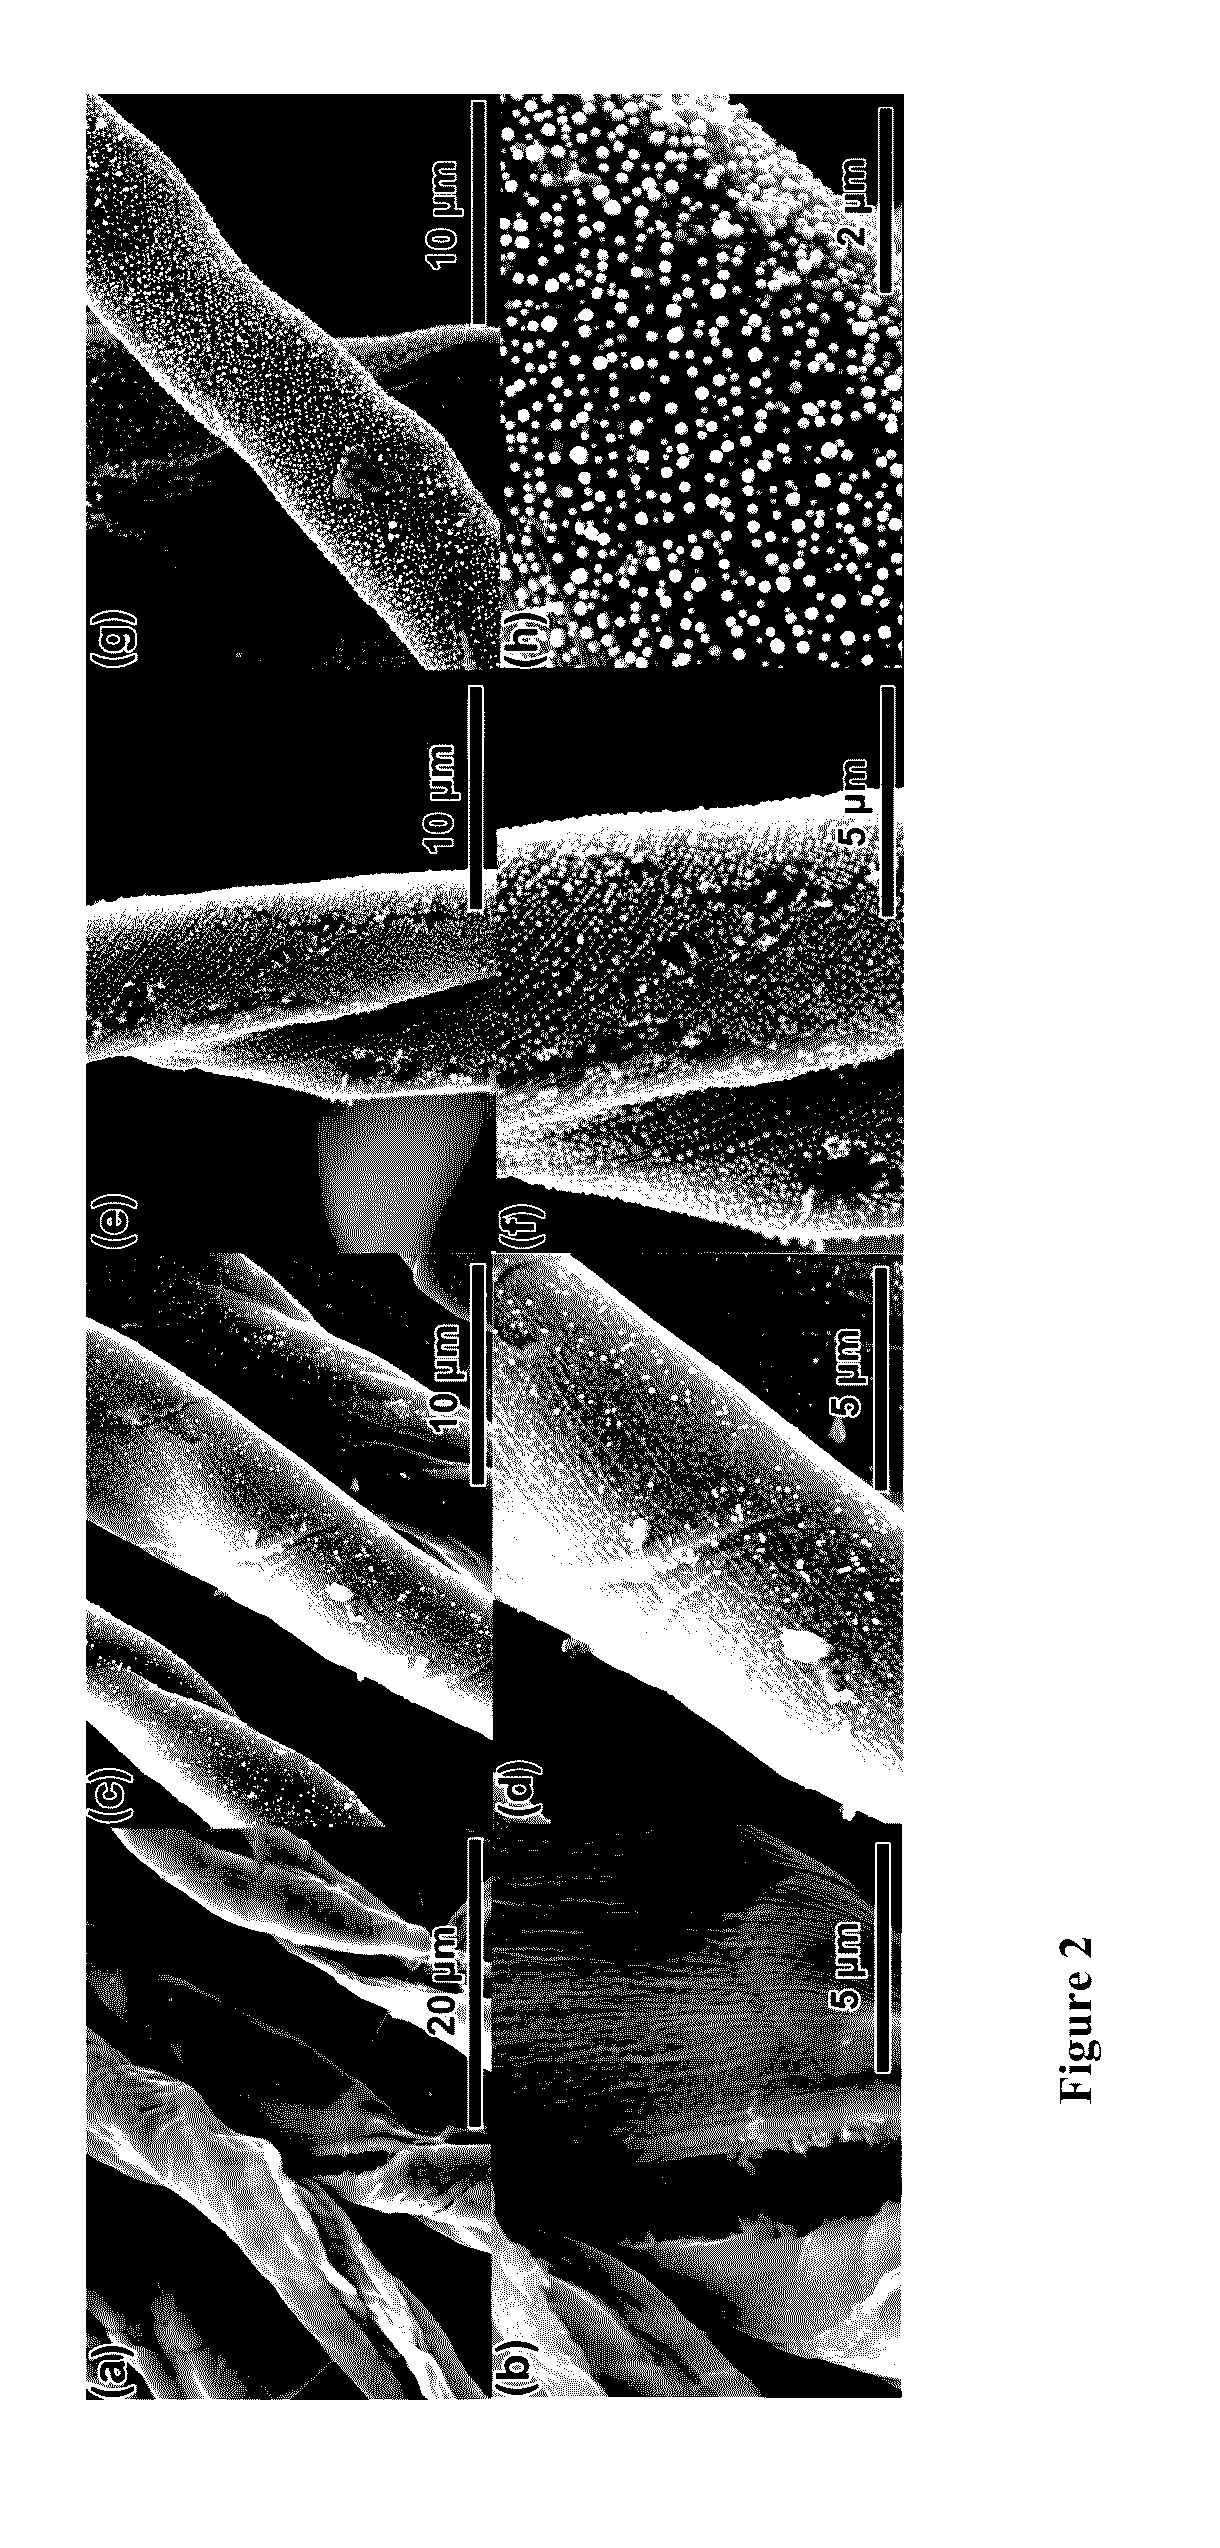 Process of forming electrodes and products thereof from biomass